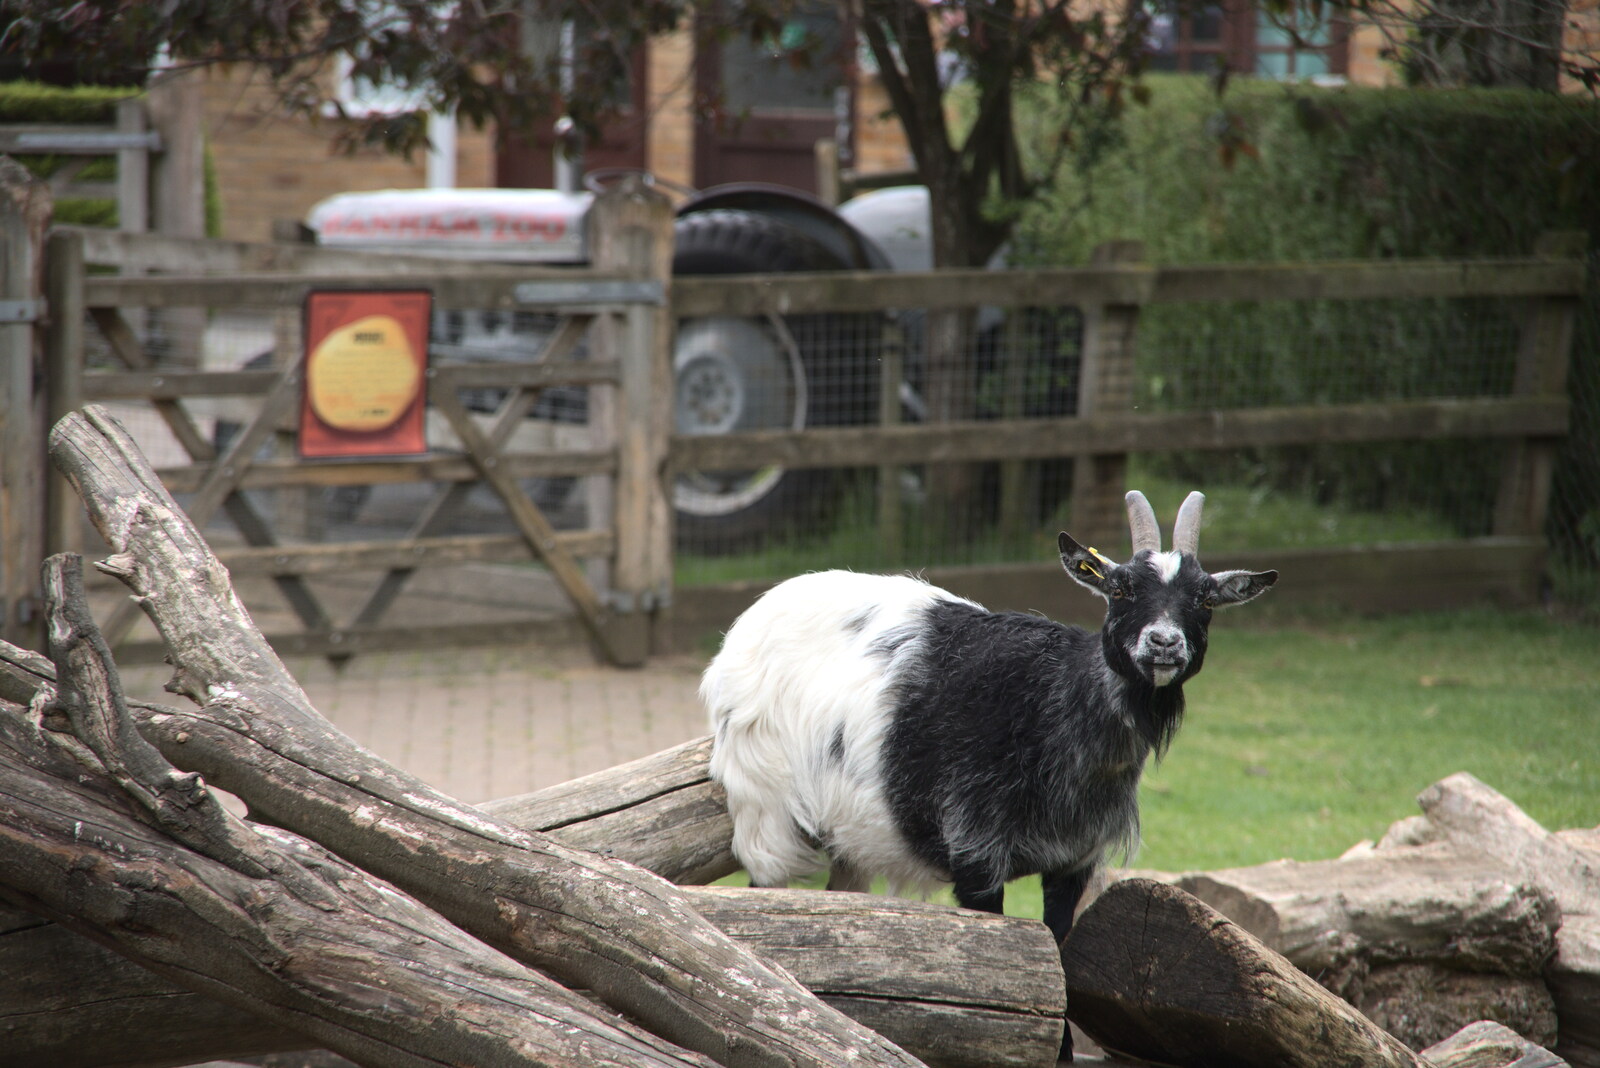 A goat gives us the Hairy Eyeball from A Moth Infestation and a Trip to the Zoo, Banham, Norfolk - 21st May 2022